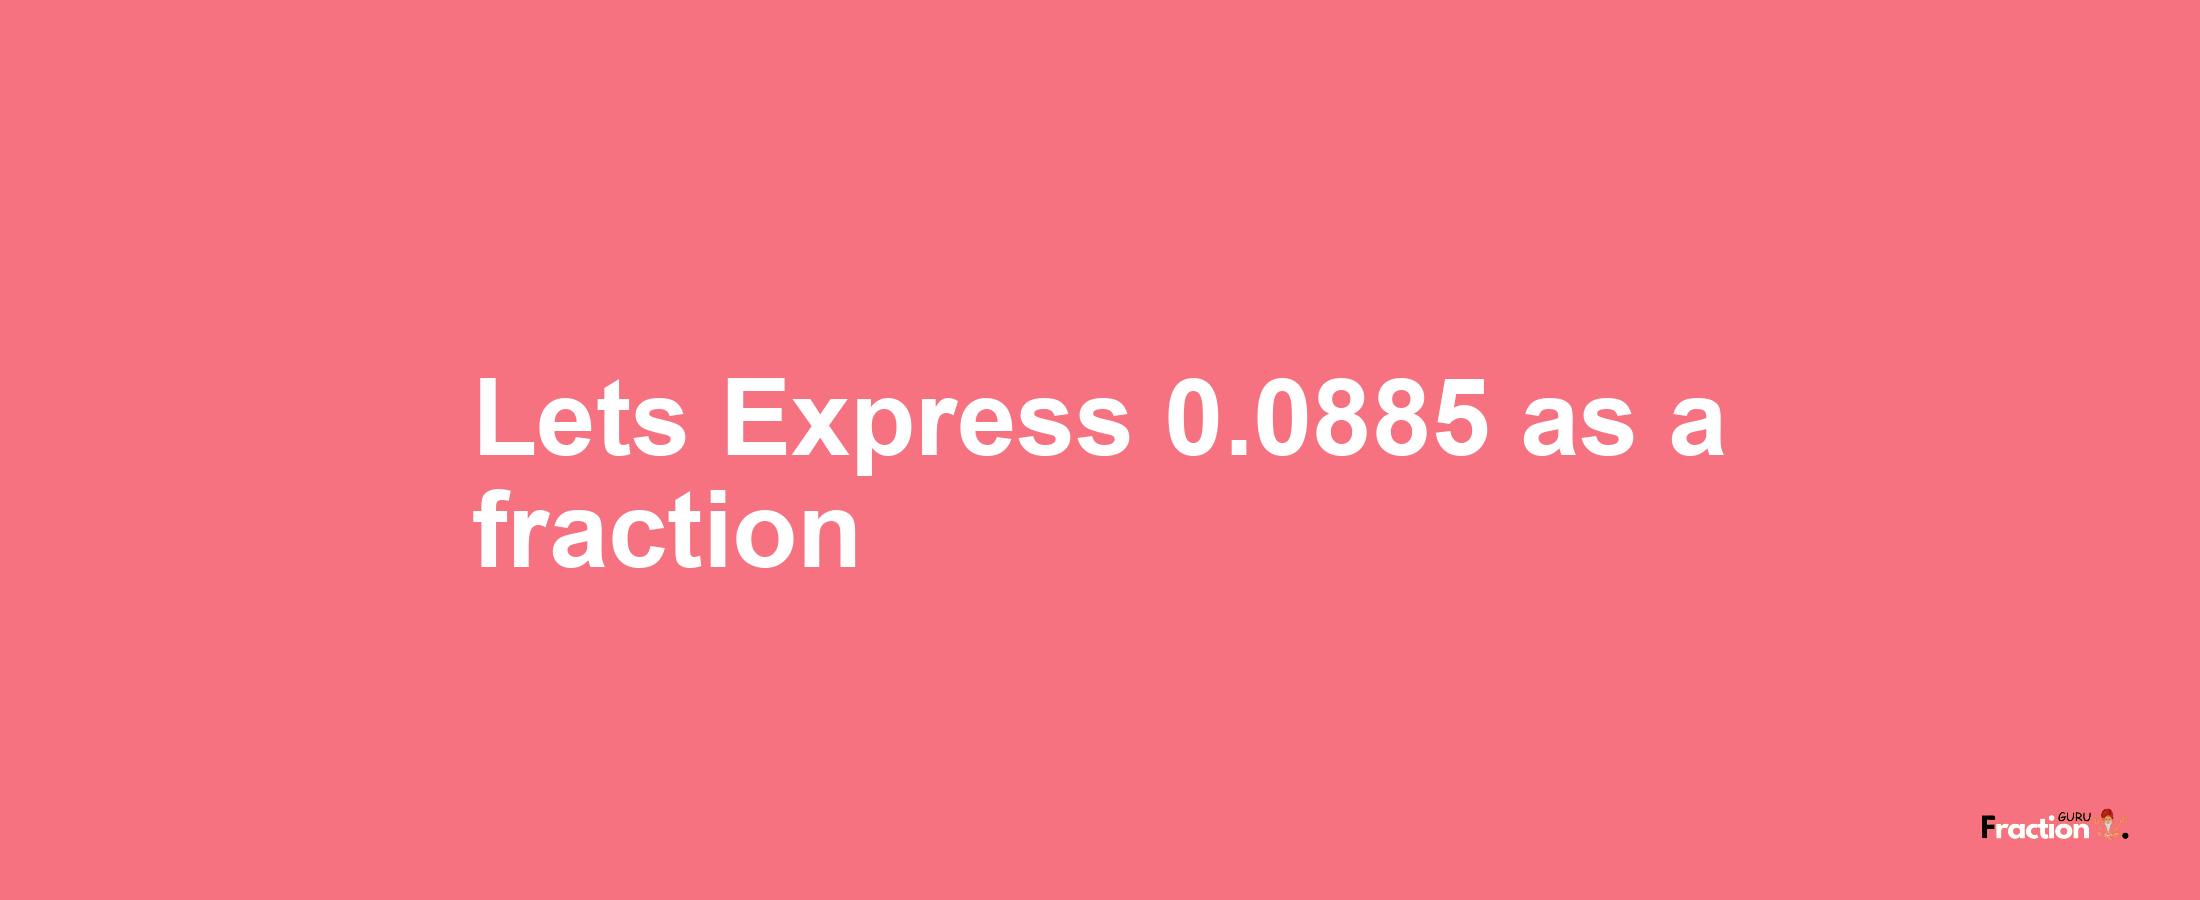 Lets Express 0.0885 as afraction